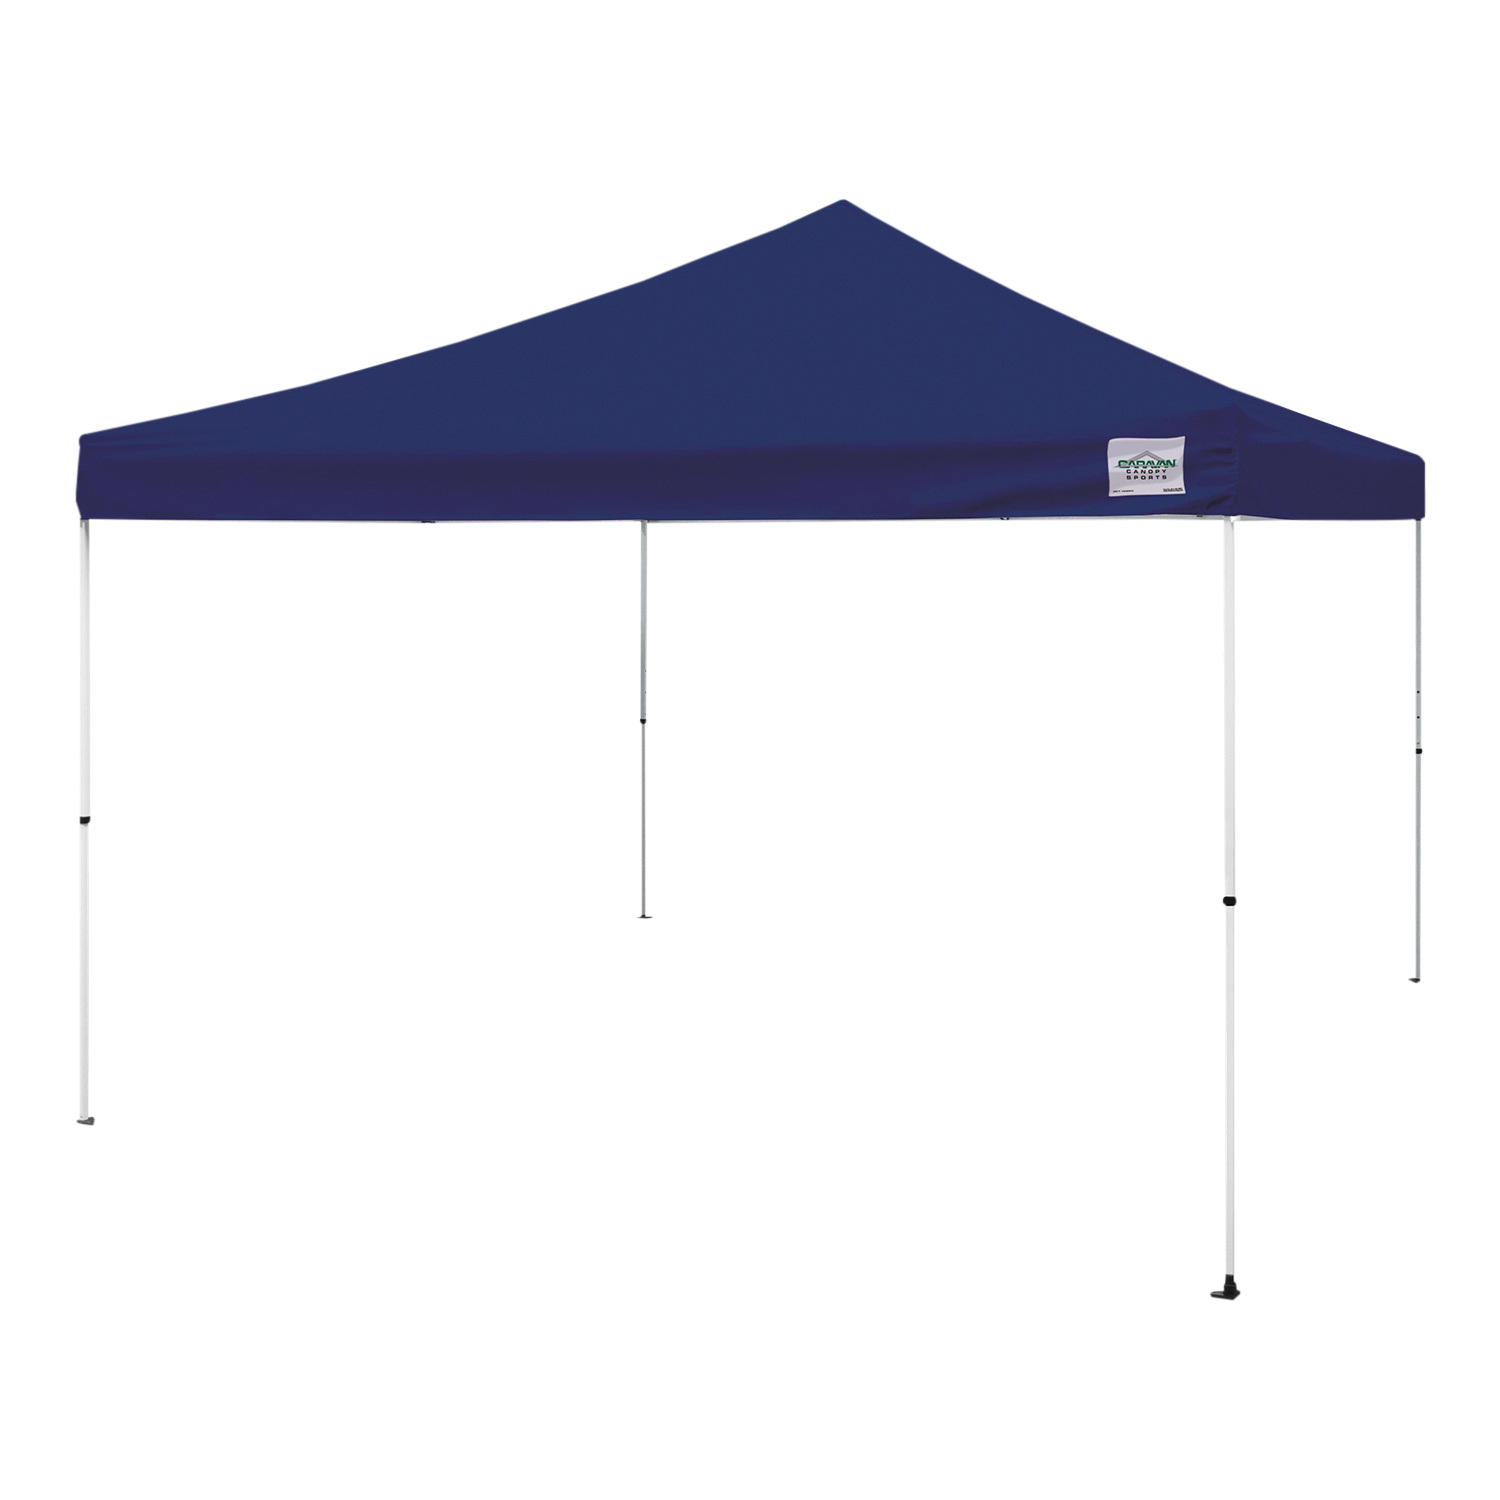 M-Series 21208100060 Canopy, 12 ft L, 12 ft W, 10 ft H, Steel Frame, Polyester Canopy, Blue Canopy